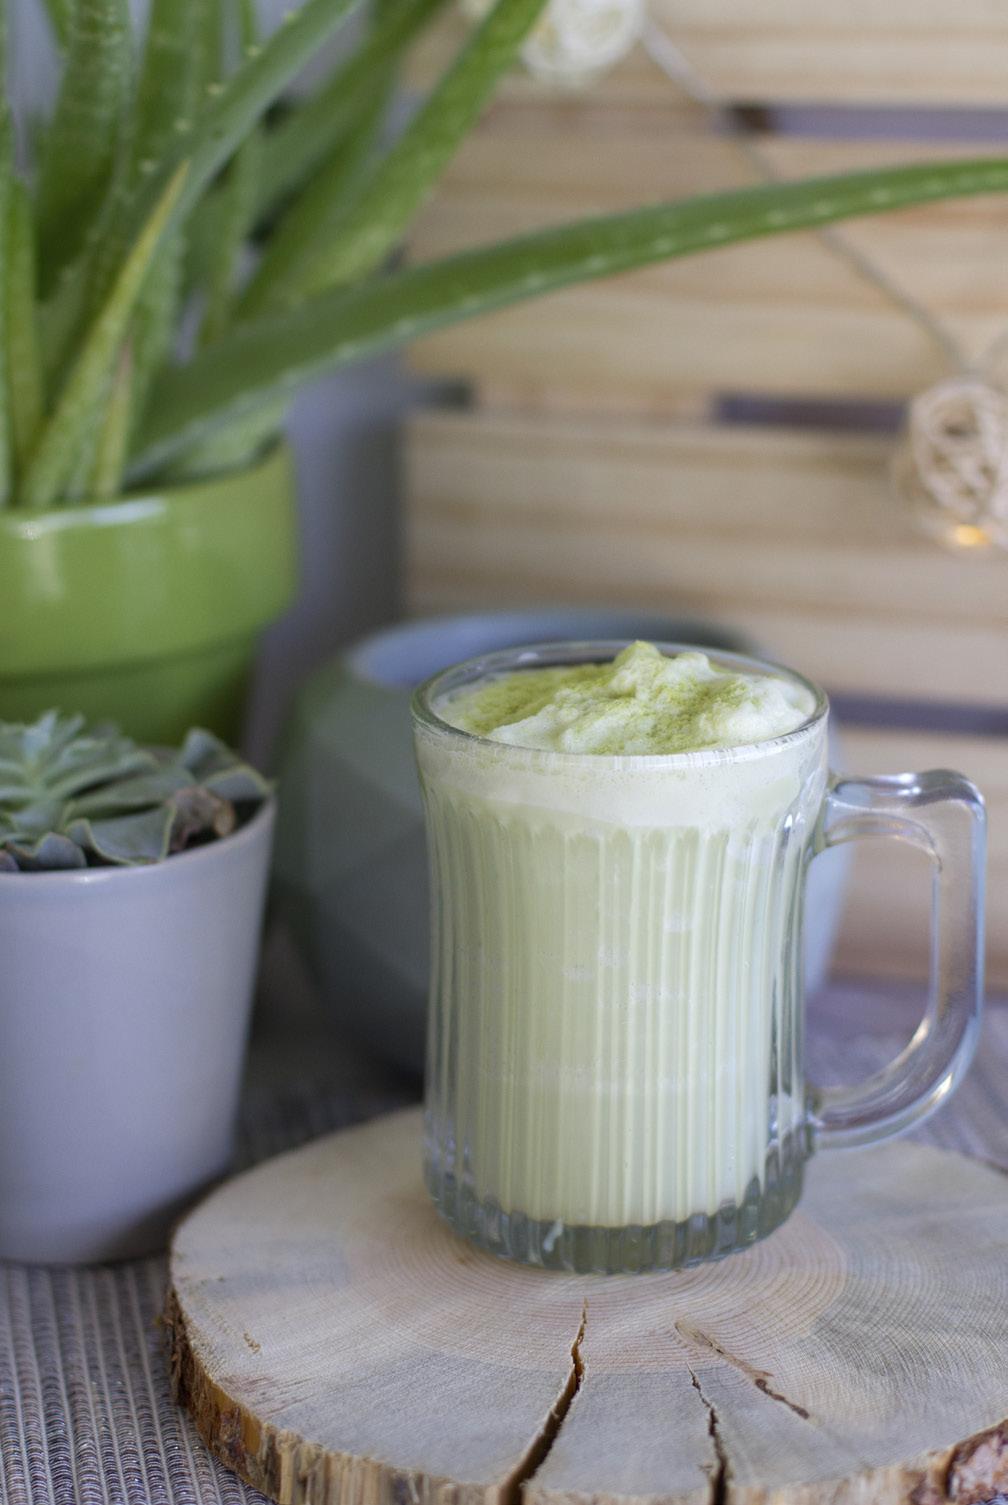 Matcha Vanilla Frap Get back to the basics with this subtly sweet matcha frap. It has the unique matcha flavor that we love with a hint of sweet vanilla. 2 tbs.